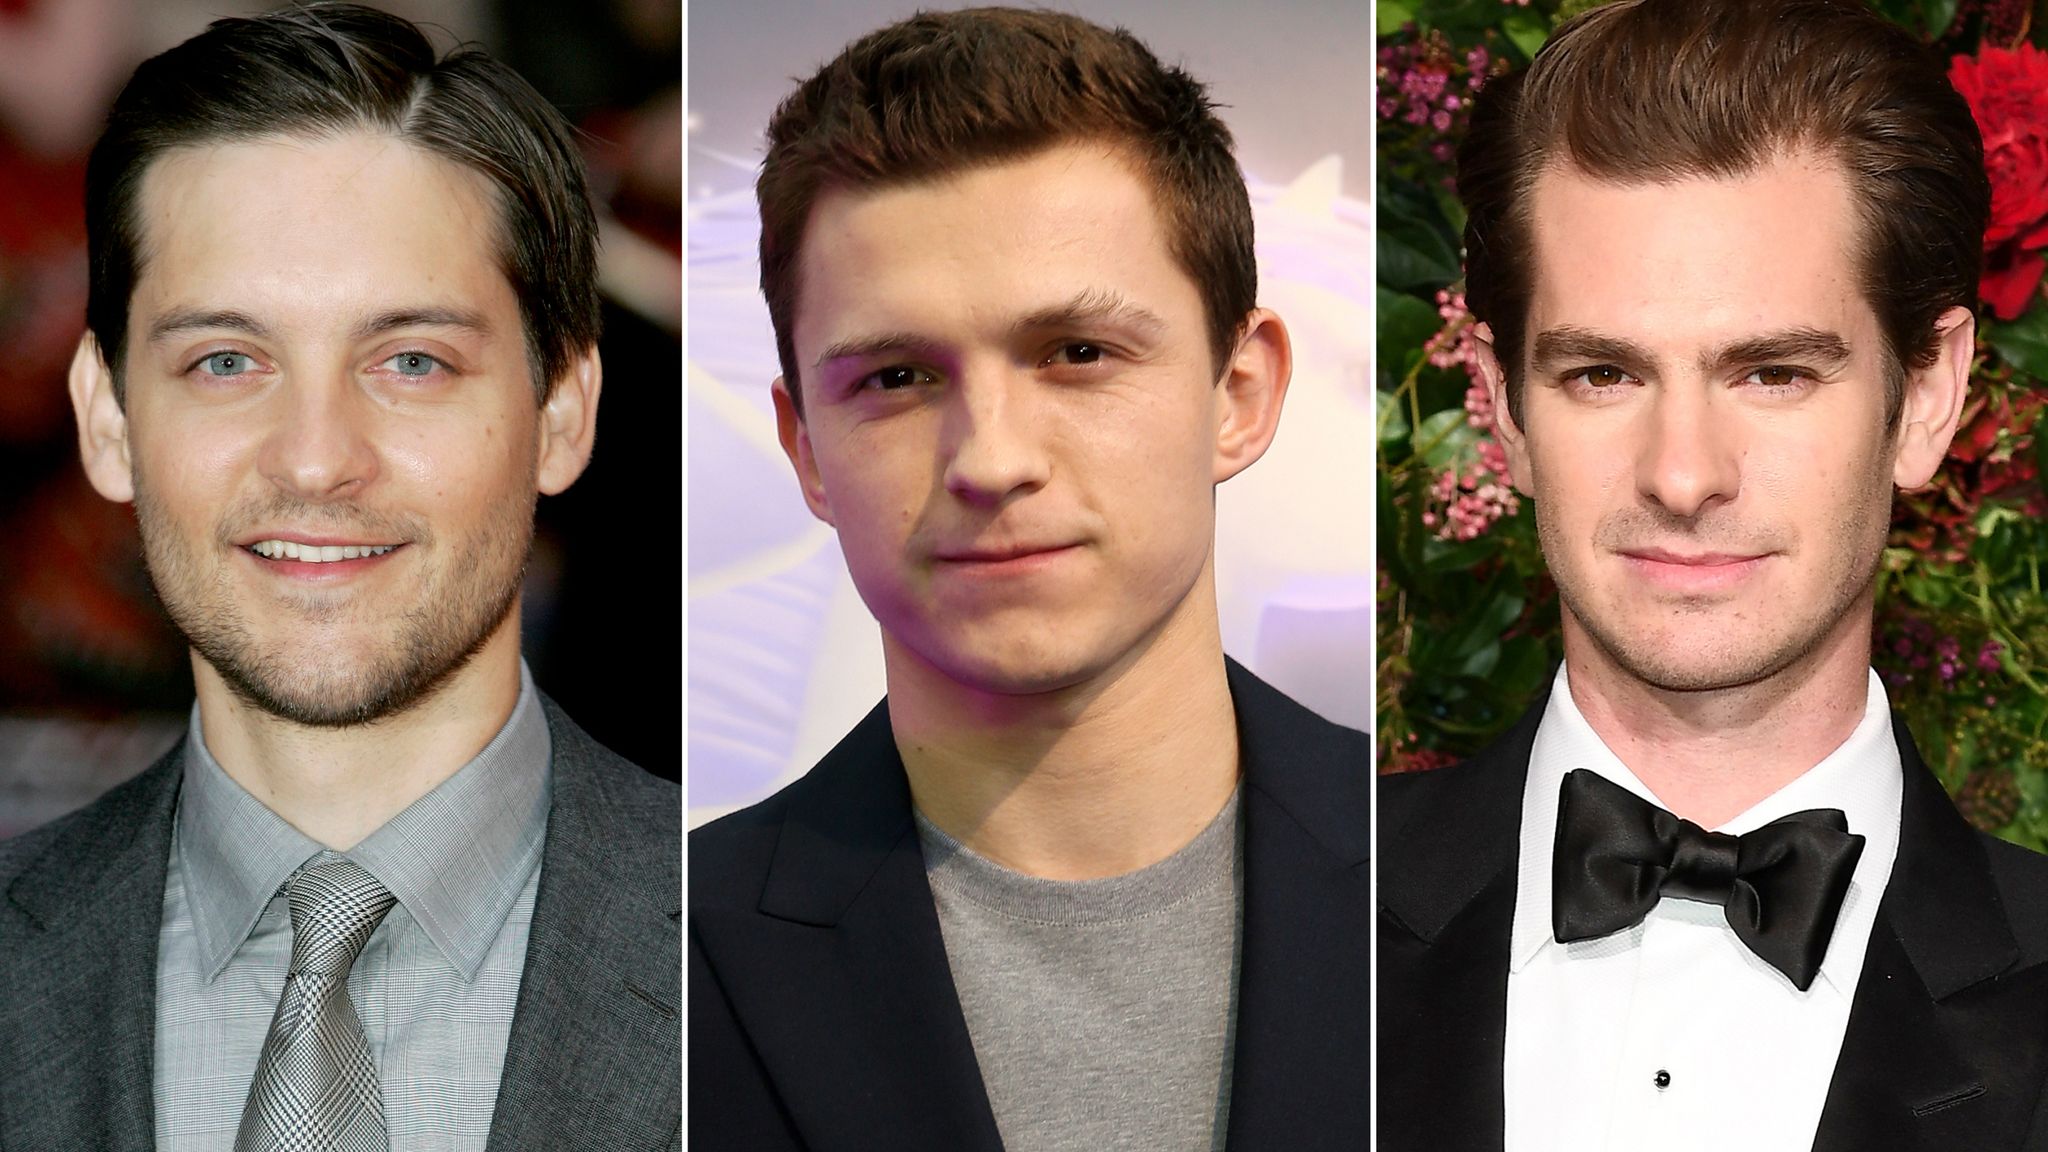 Spider-Man 3: Tobey Maguire and Andrew Garfield to reprise web-slinging roles alongside Tom Holland - reports